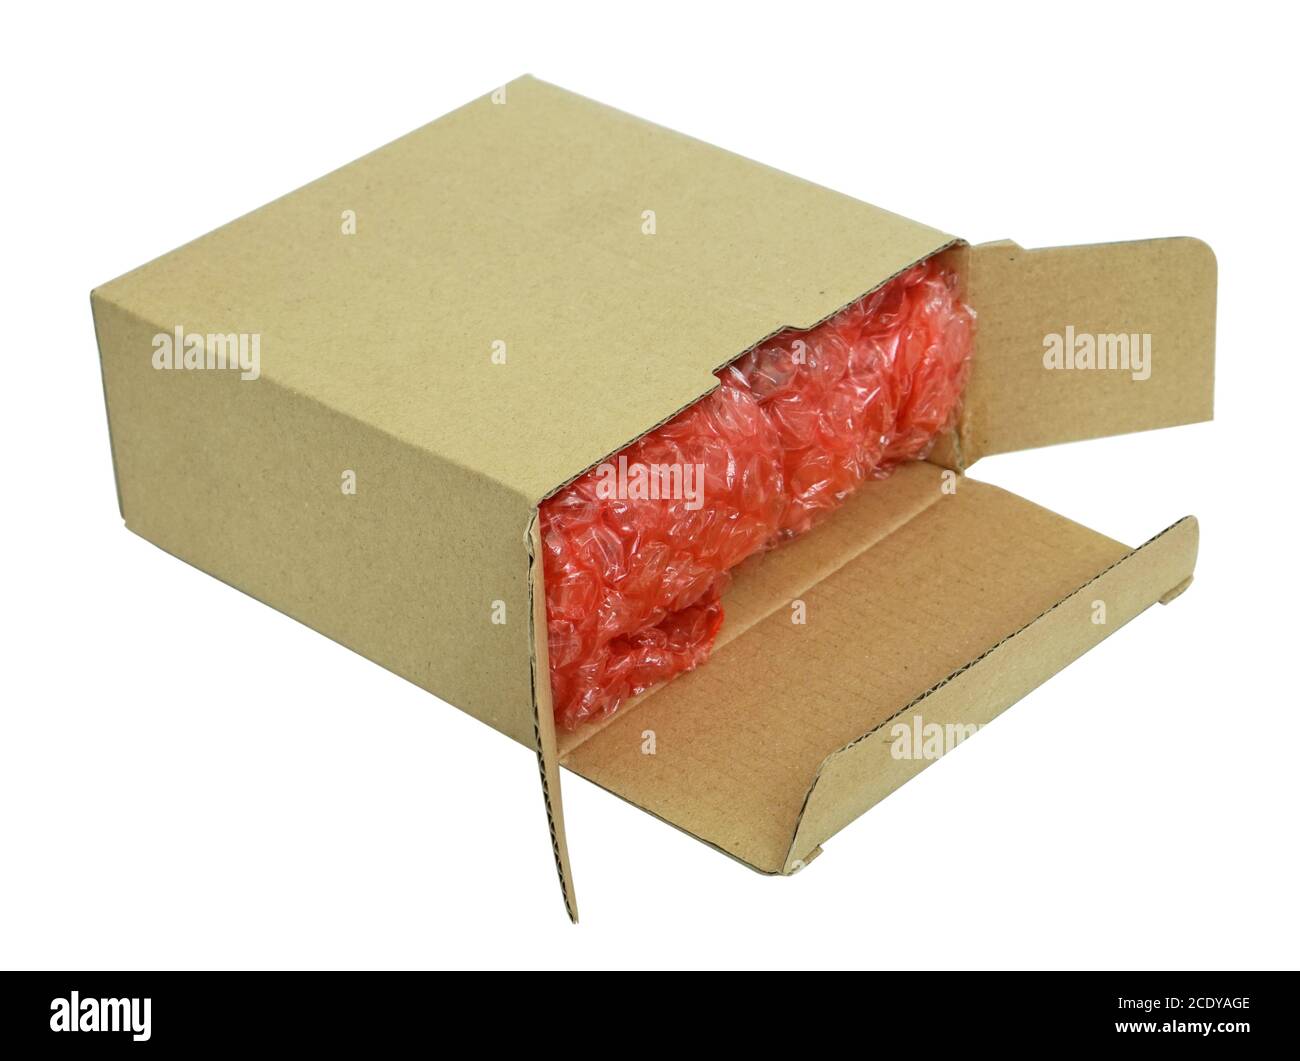 Spare parts and electronic components packed in soft film and carton box isolated Stock Photo